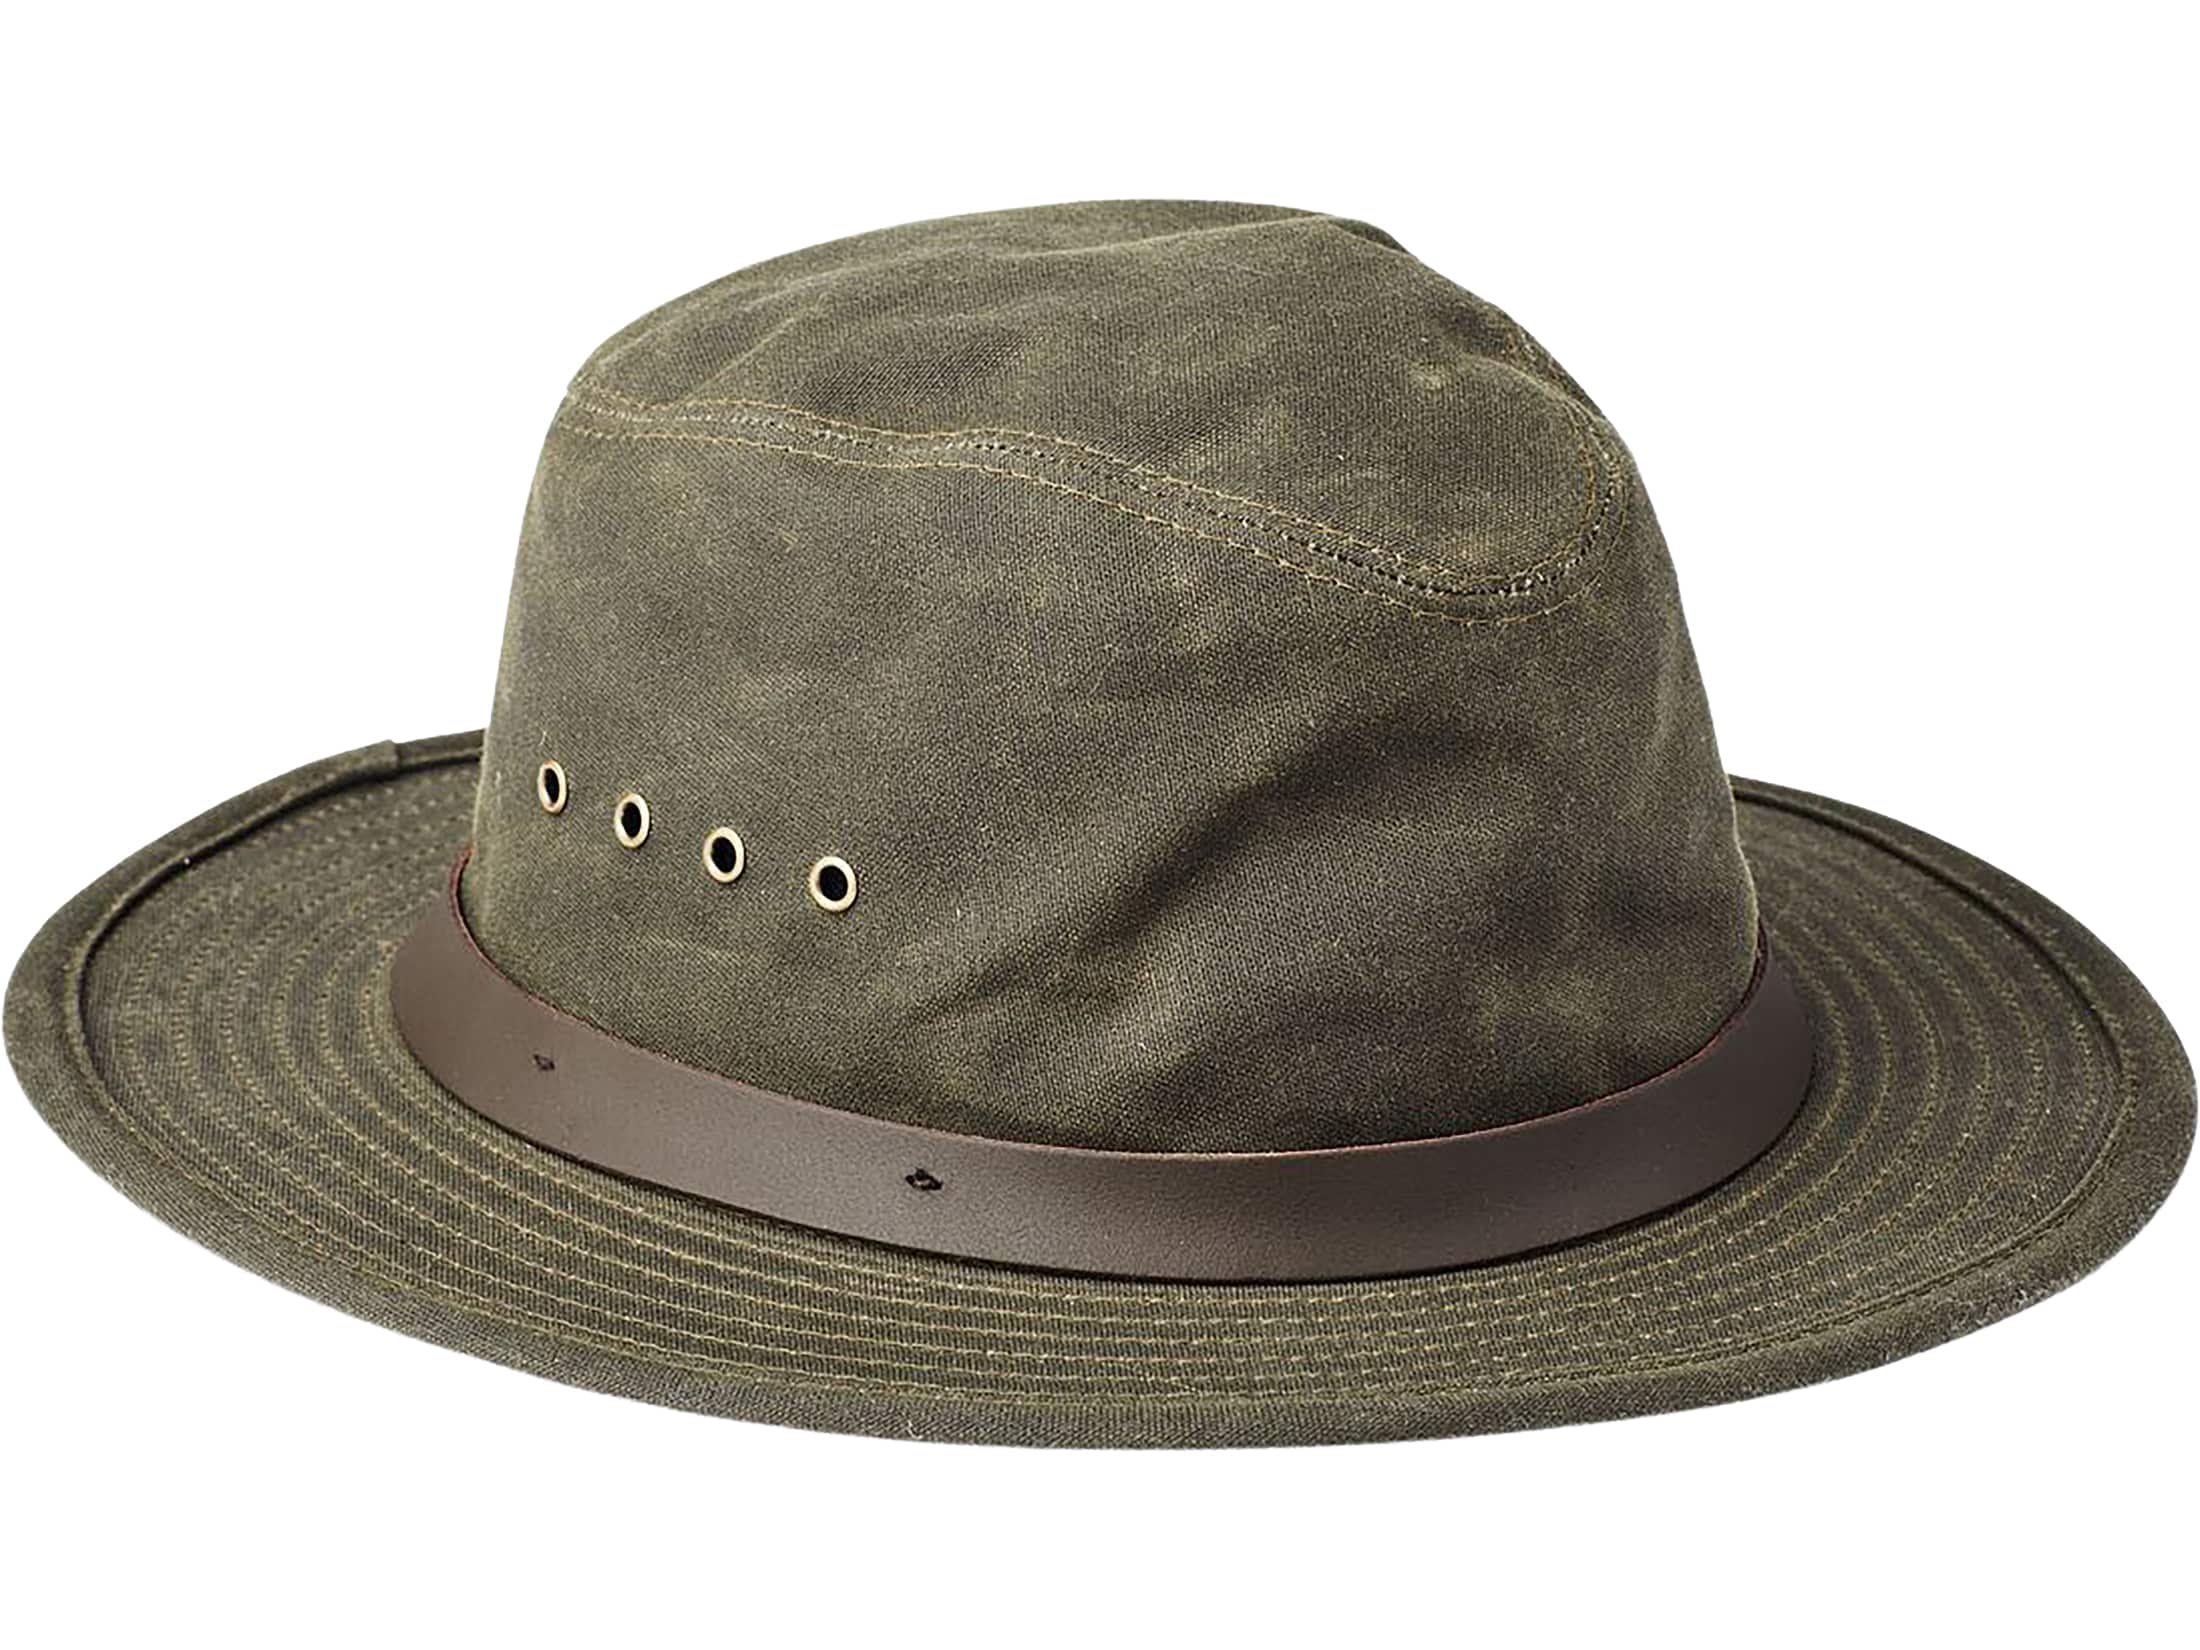 How to Waterproof a Filson Packer Hat with All-Natural Otter Wax